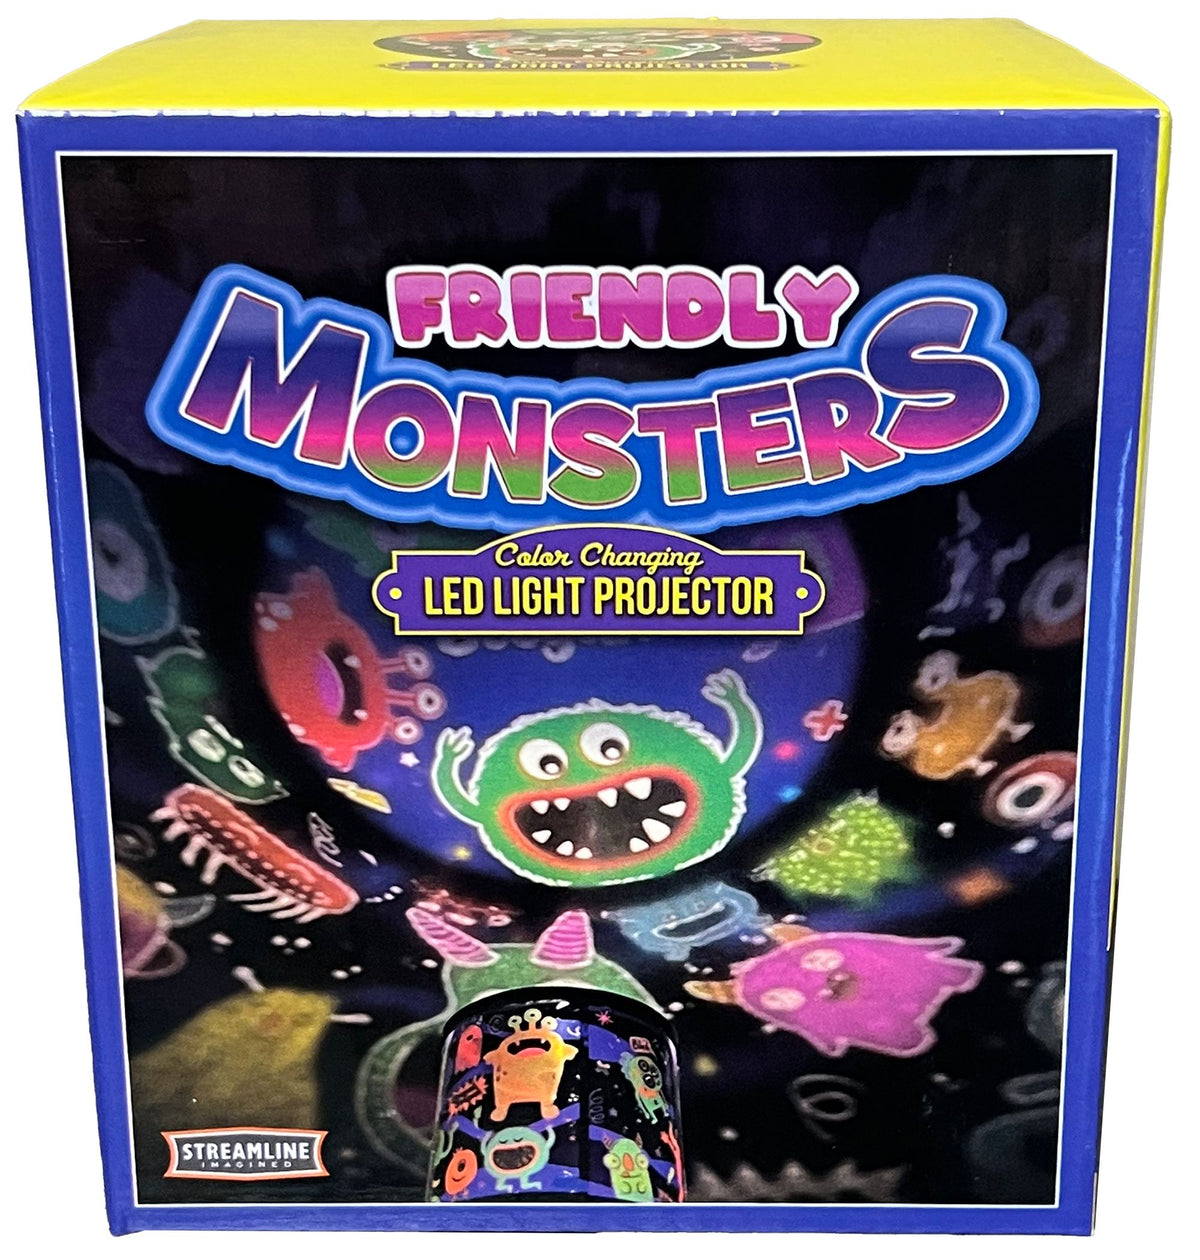 Friendly Monsters LED Projection Light